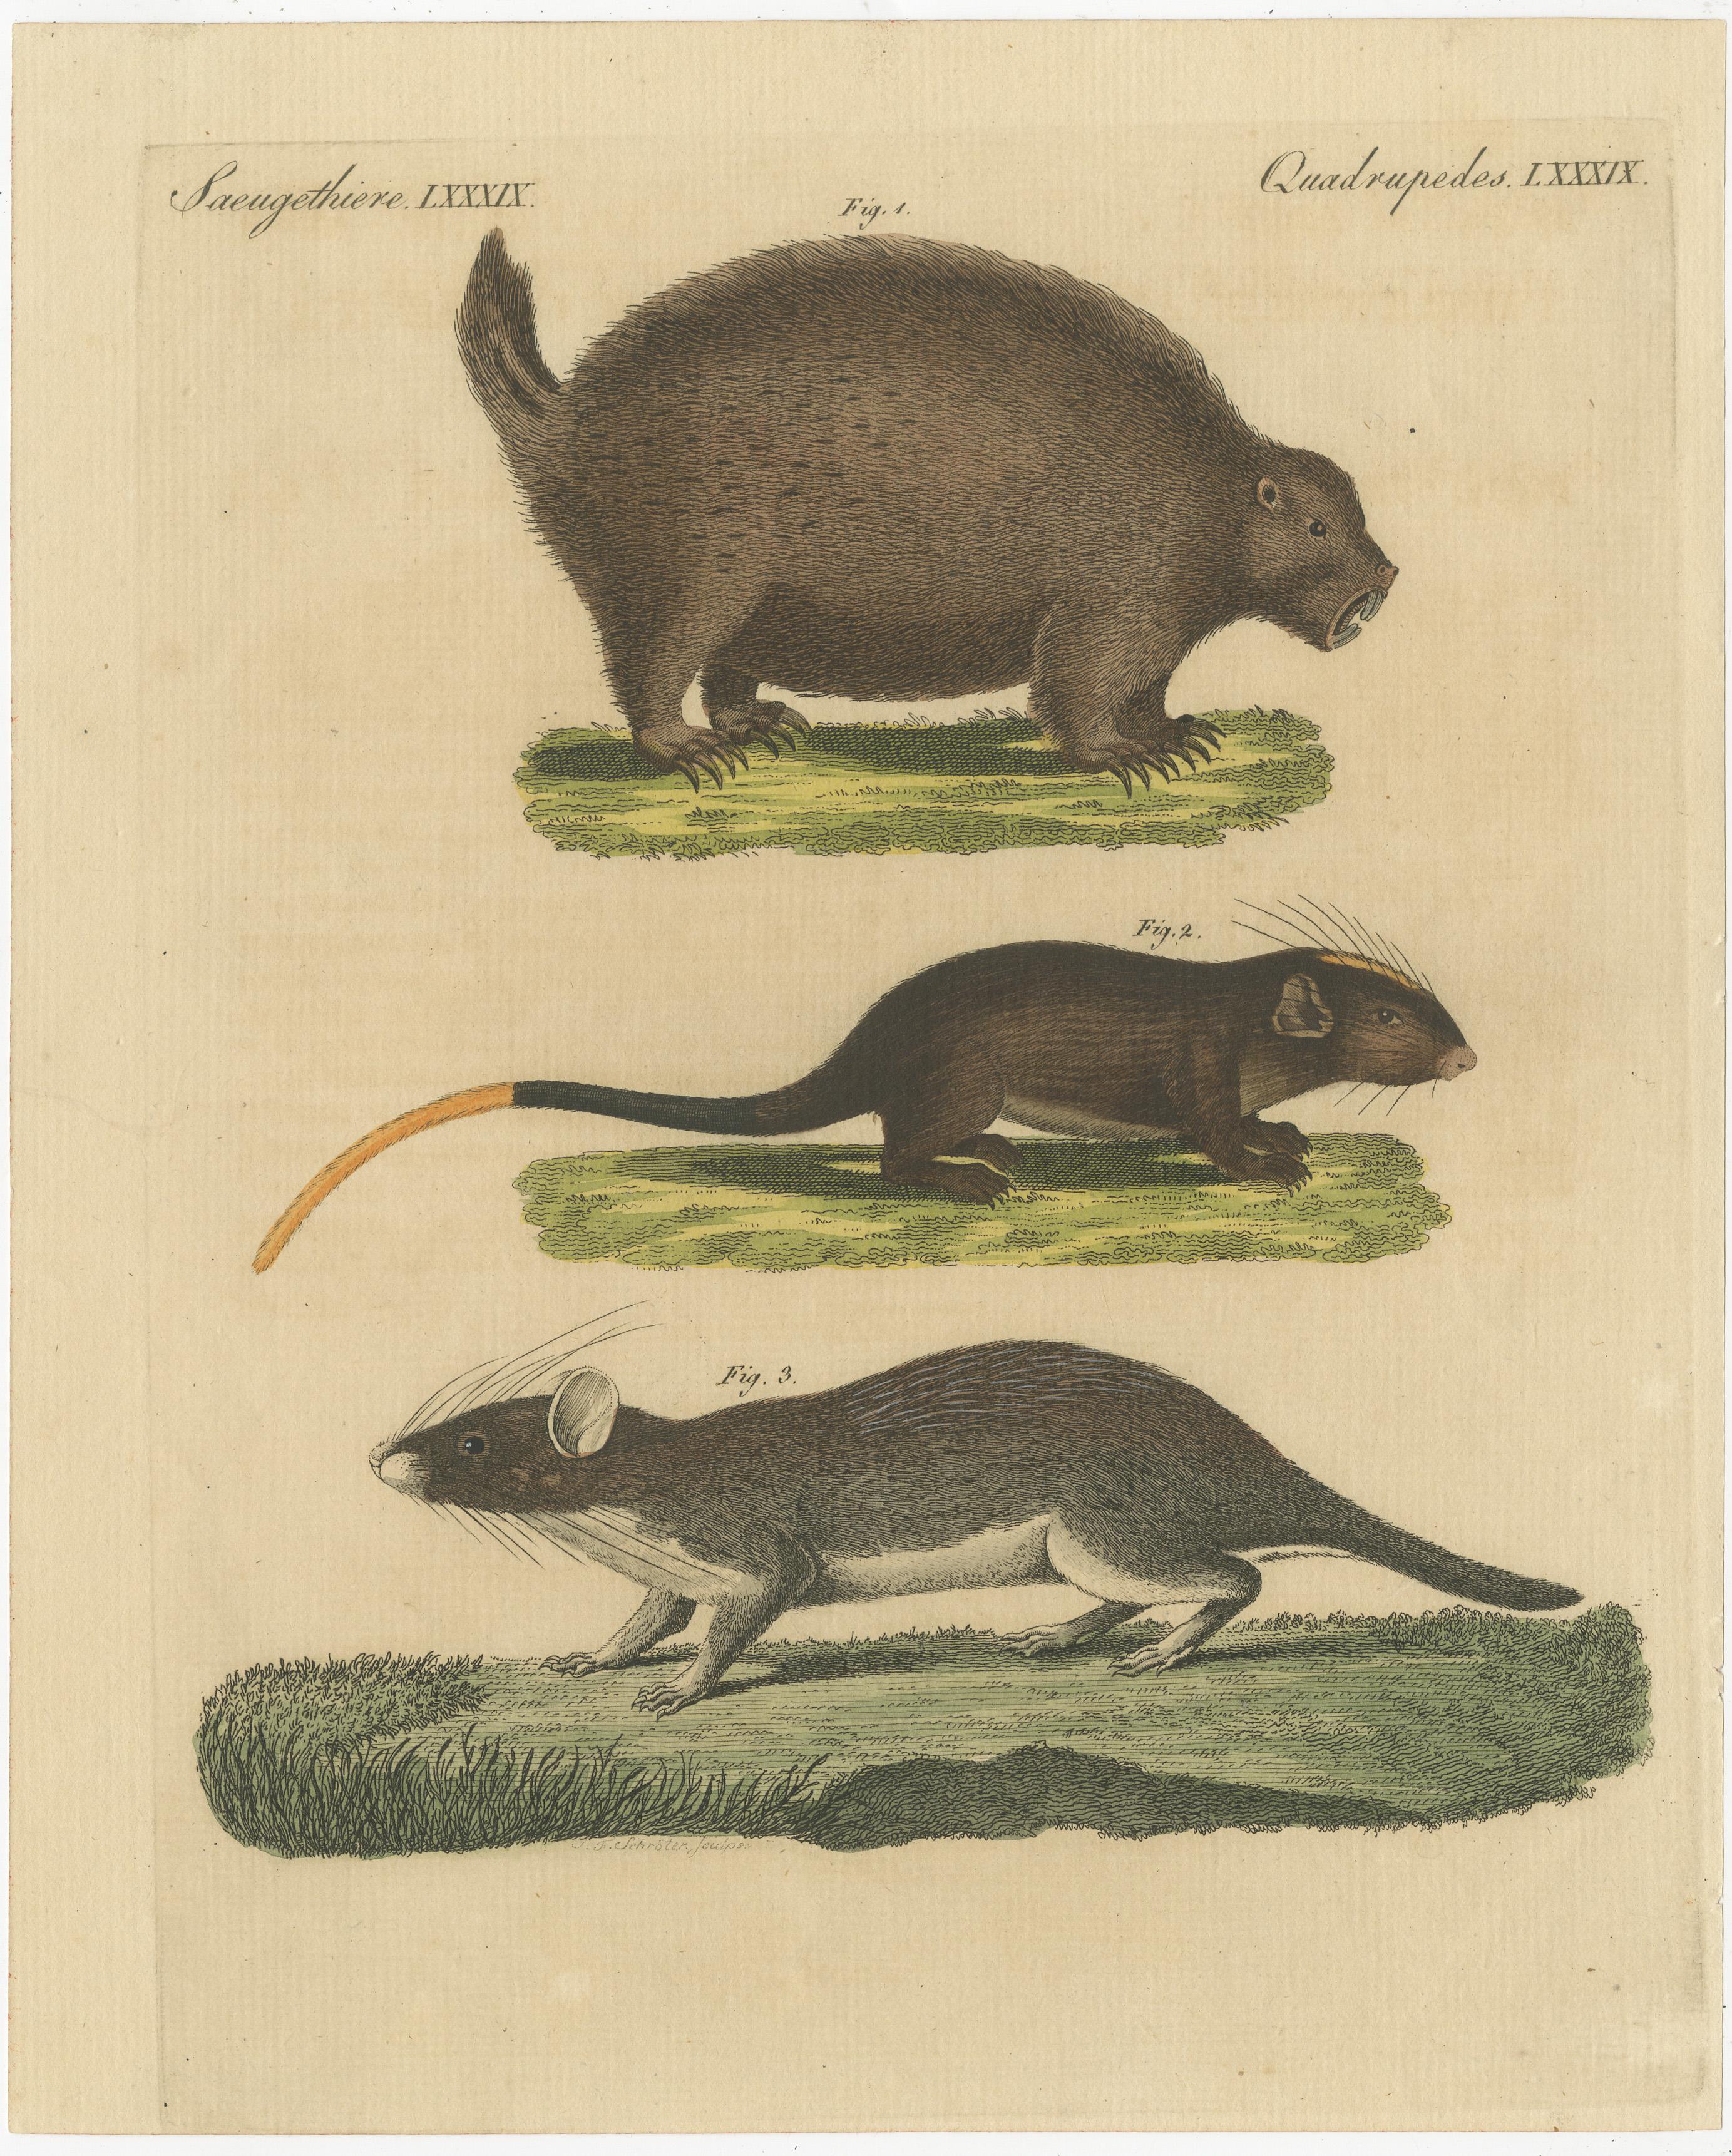 Paper Original Antique Print of a Porcupine and other large Rodents For Sale